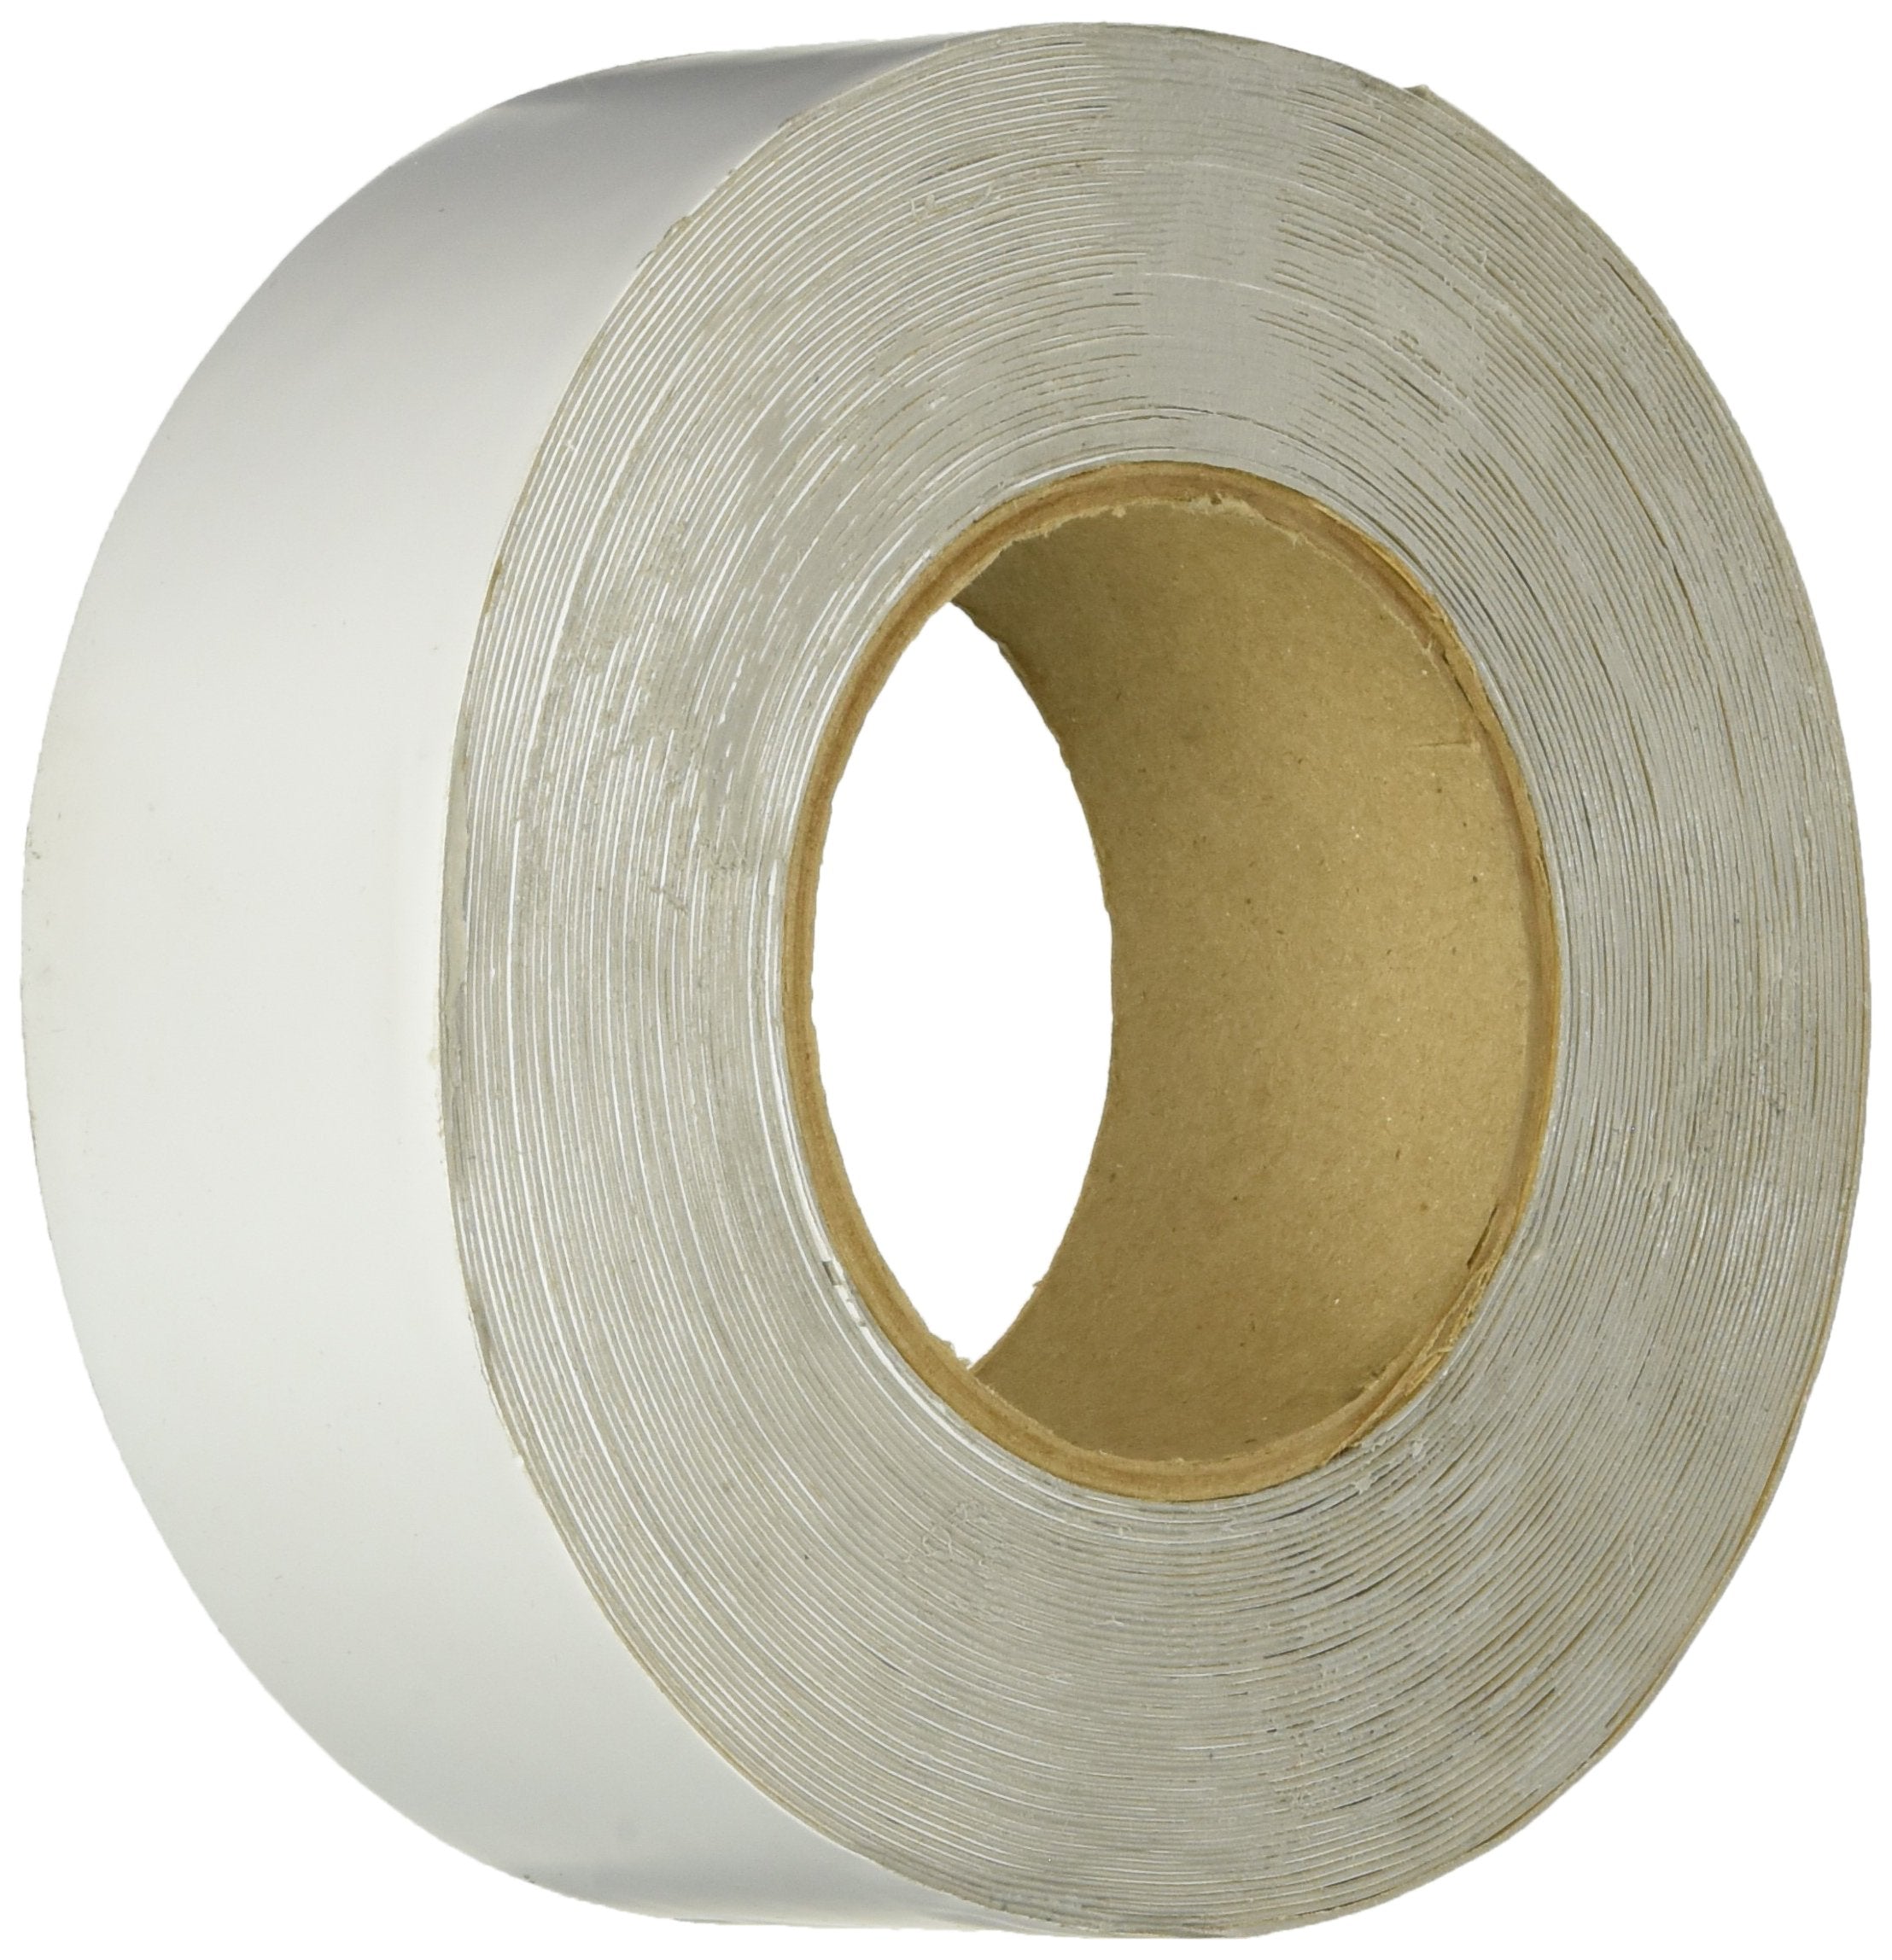 AP Products 017-413832 Sika Multiseal Plus Tape - 2" x 50' Roll